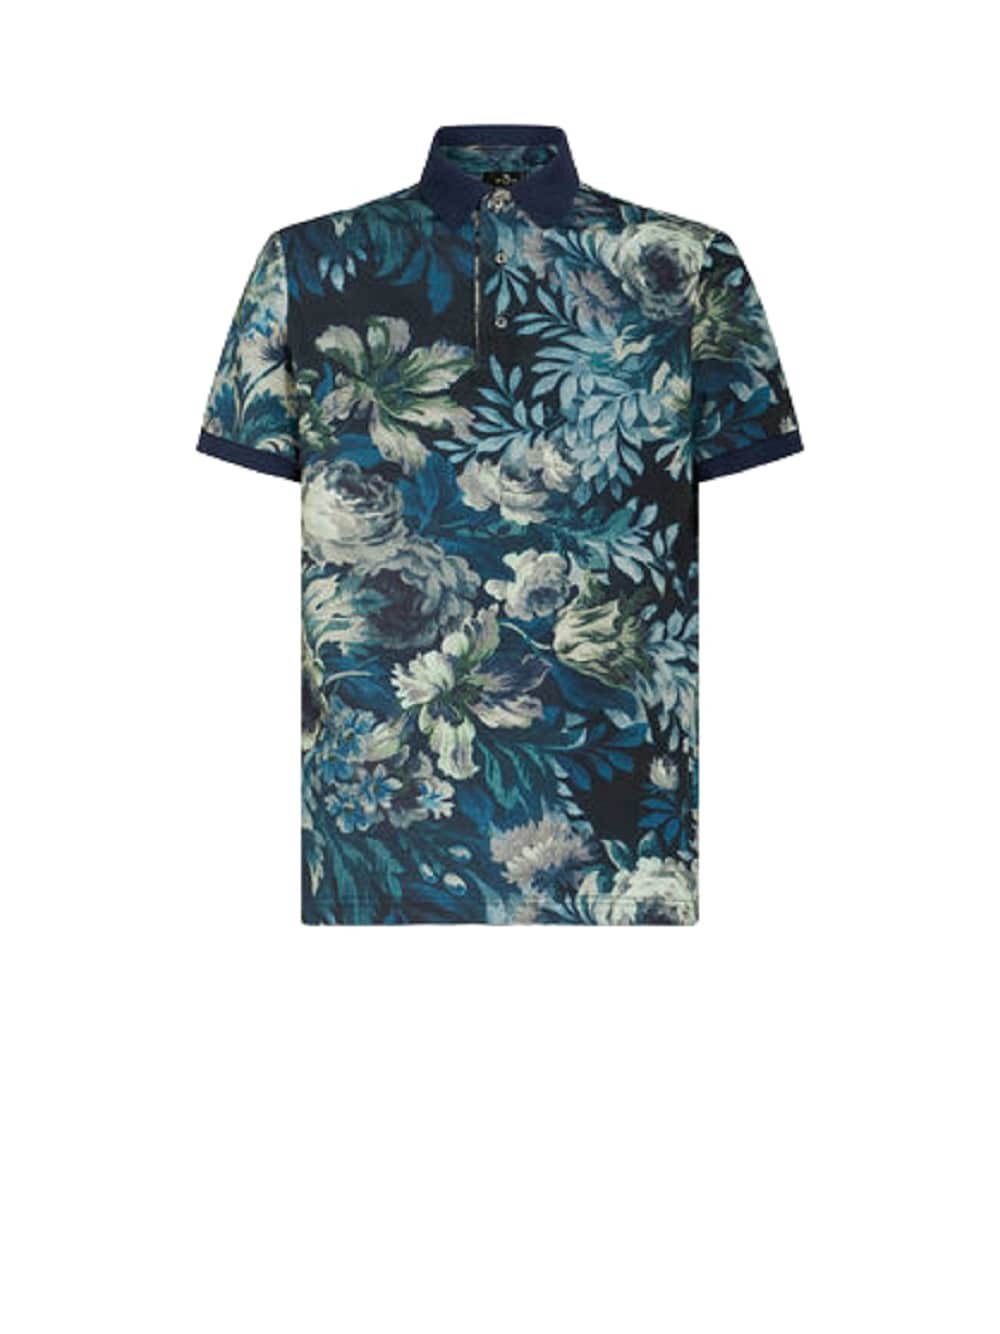 ETRO COTTON JERSEY POLO SHIRT ENRICHED WITH A FLORAL PRINT.